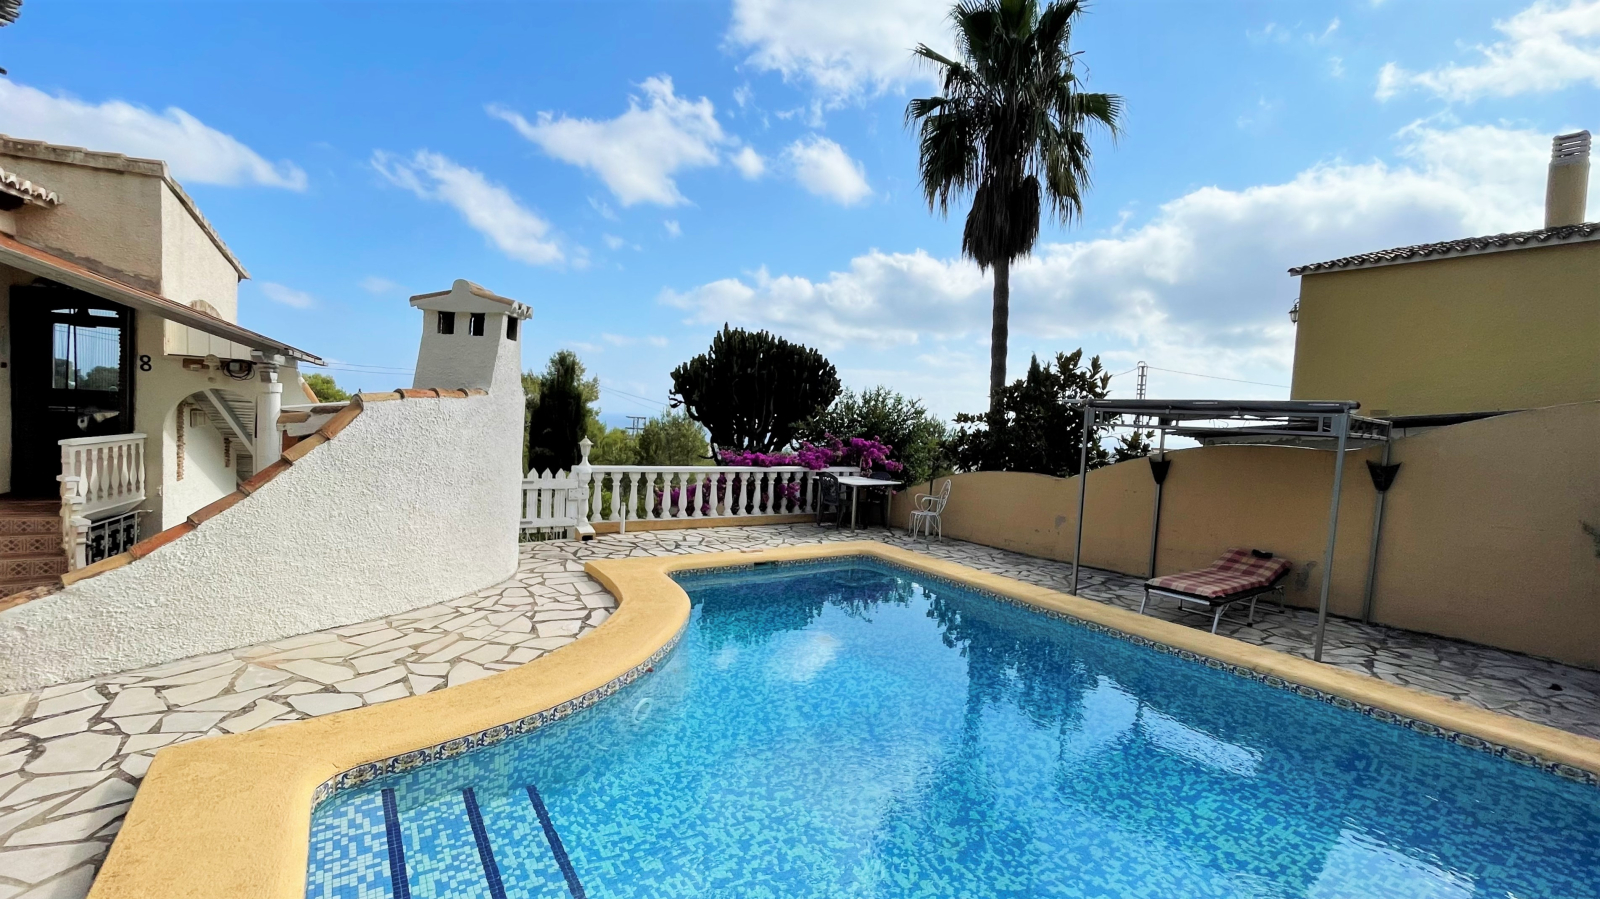 Paradise close to nature in Denia at the foot of the Montgó: guest flat, pool, sea view and garage